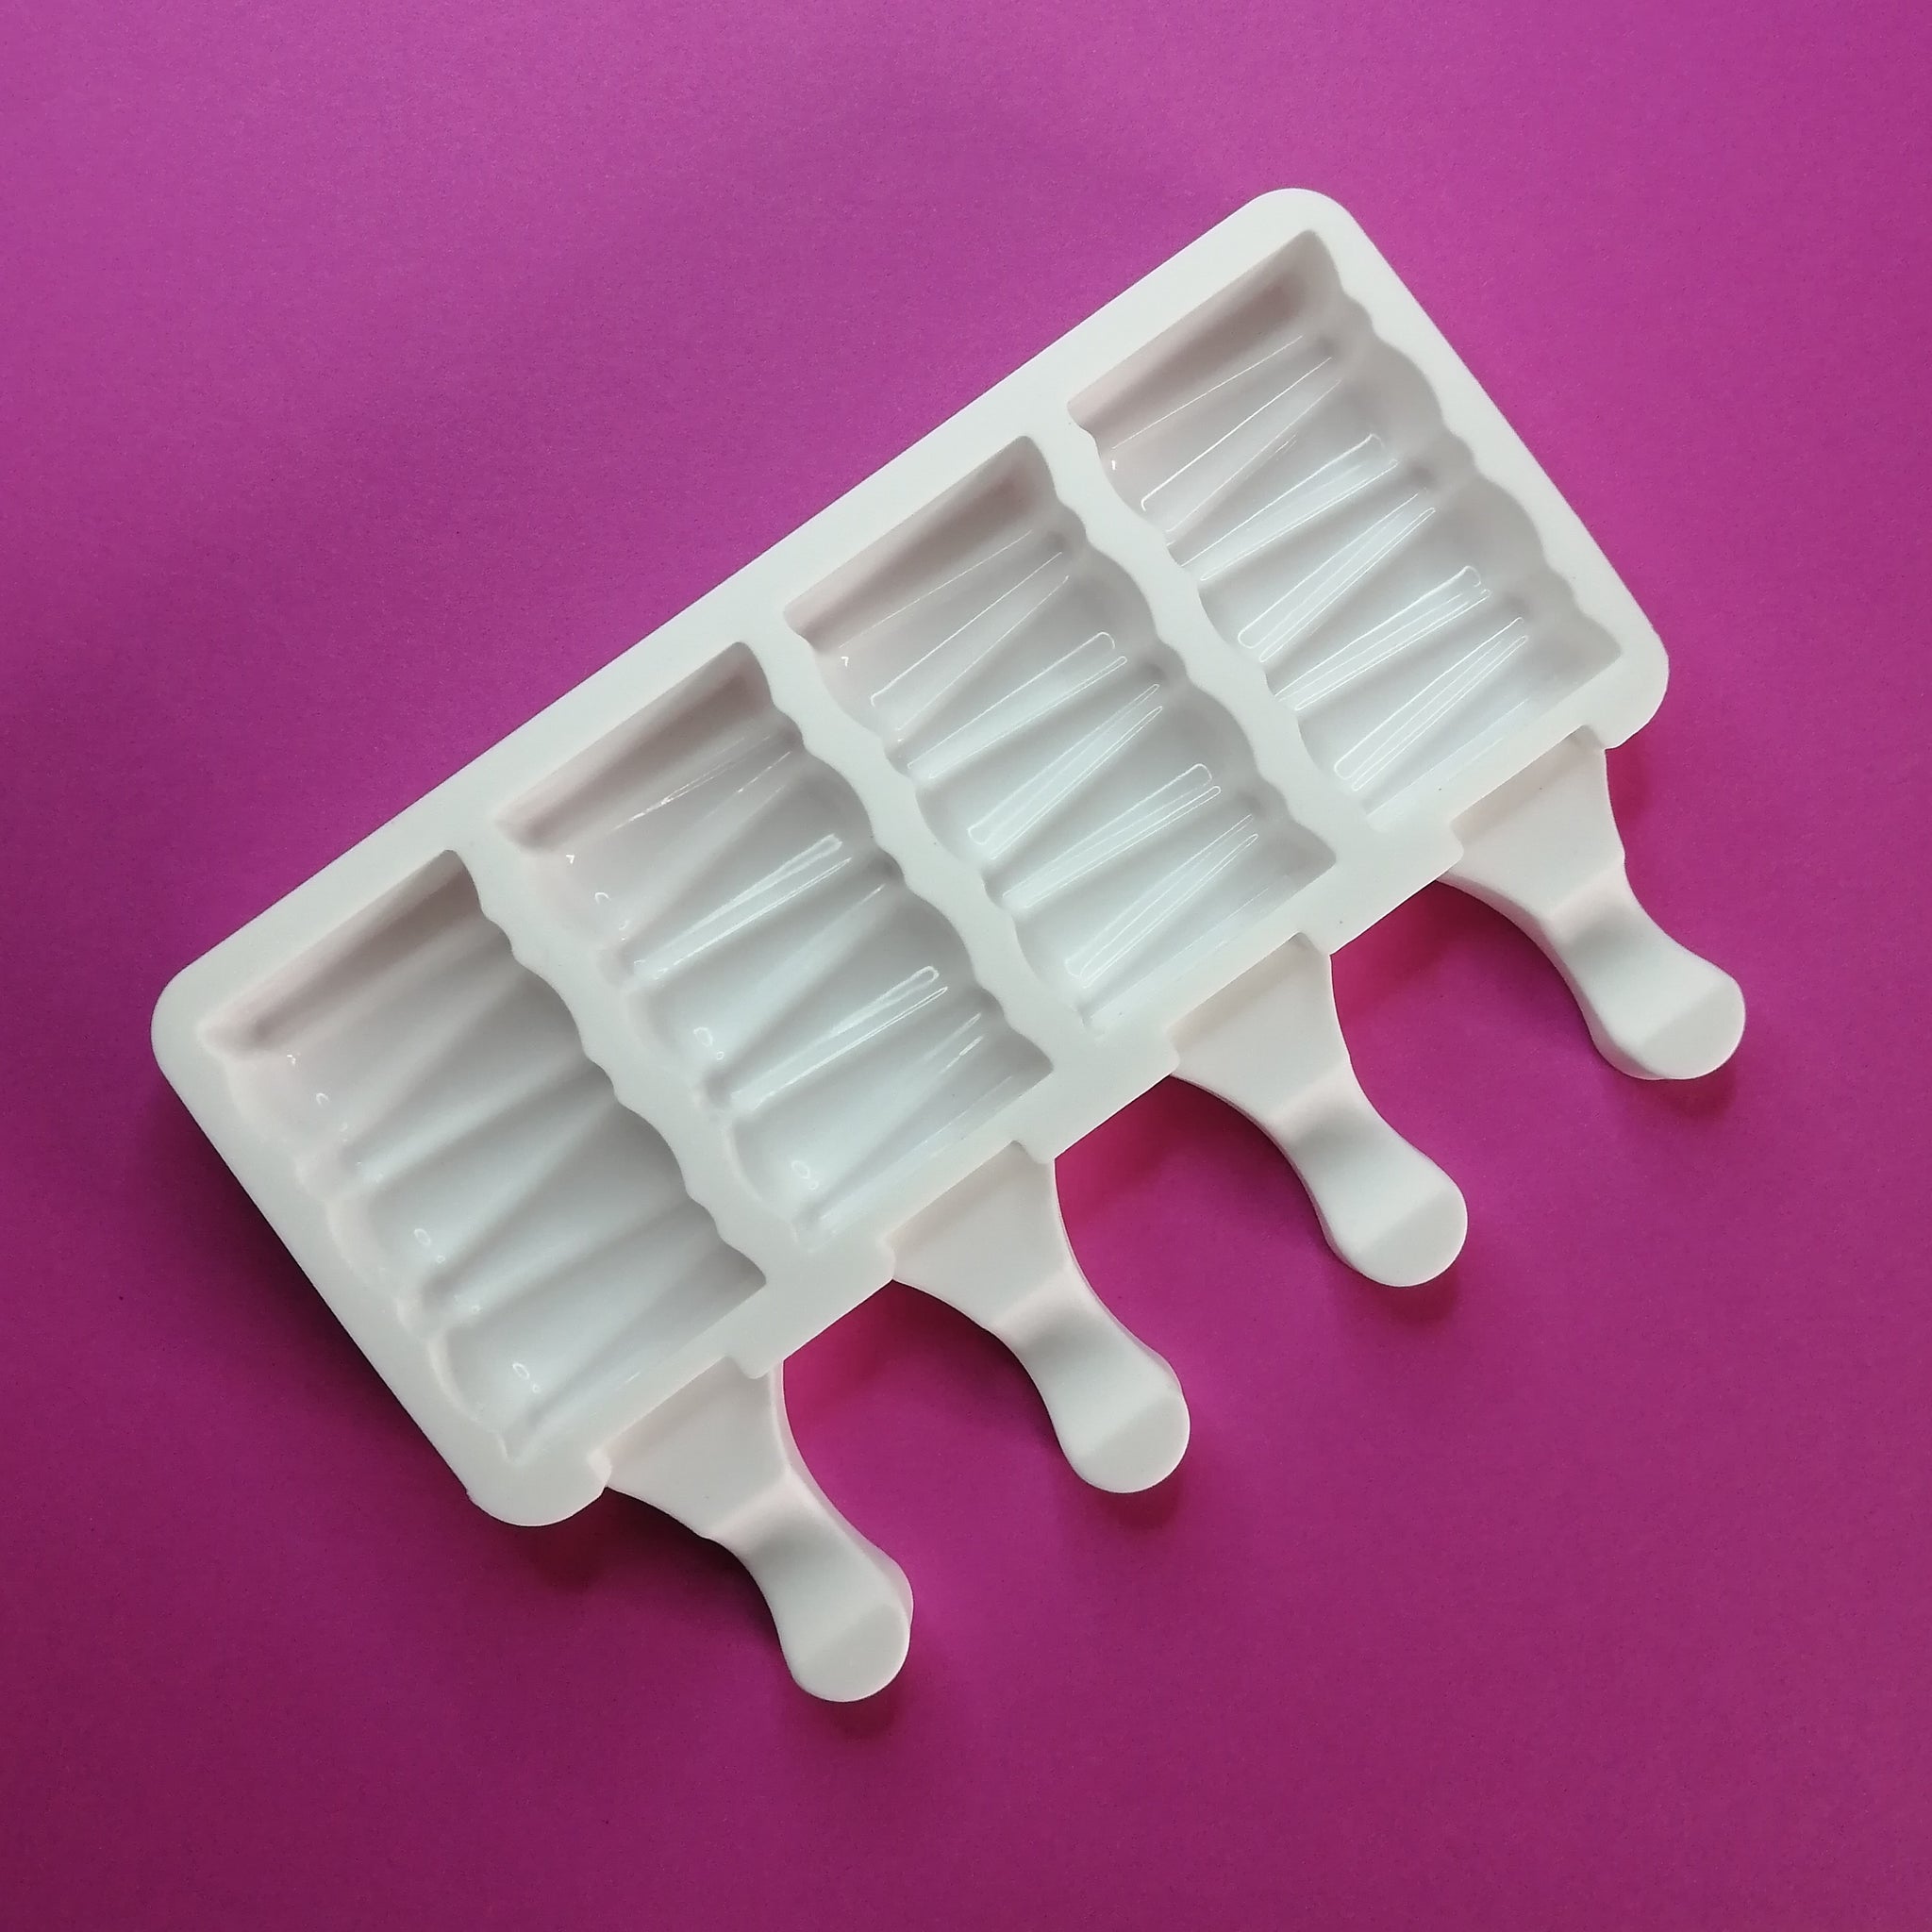 Silicone Triangle Gem Cakesicle Mould - Small